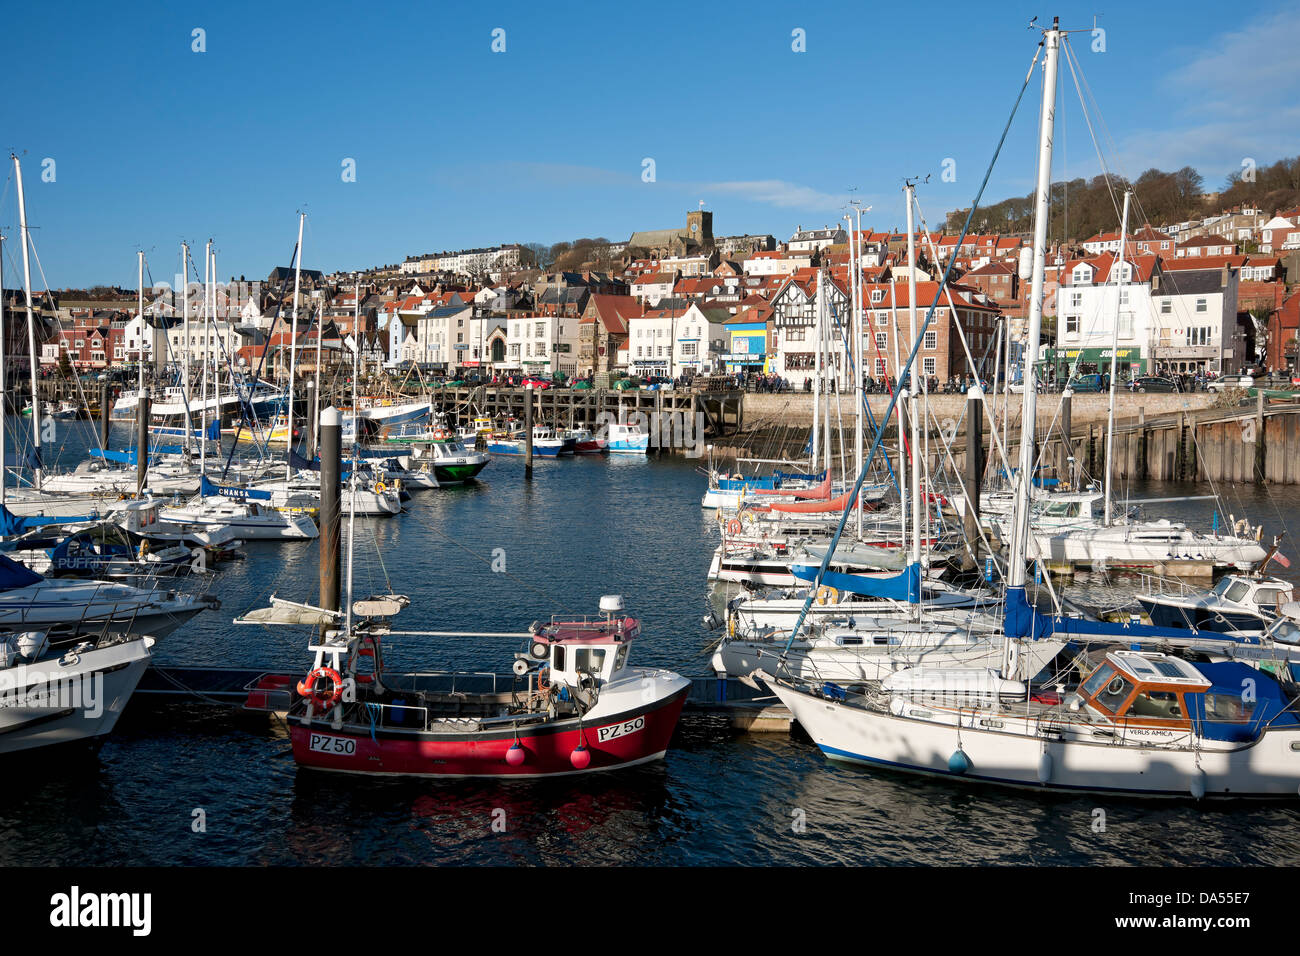 Boats moored in the marina harbour in winter Scarborough seafront town resort  North Yorkshire England UK United Kingdom GB Great Britain Stock Photo